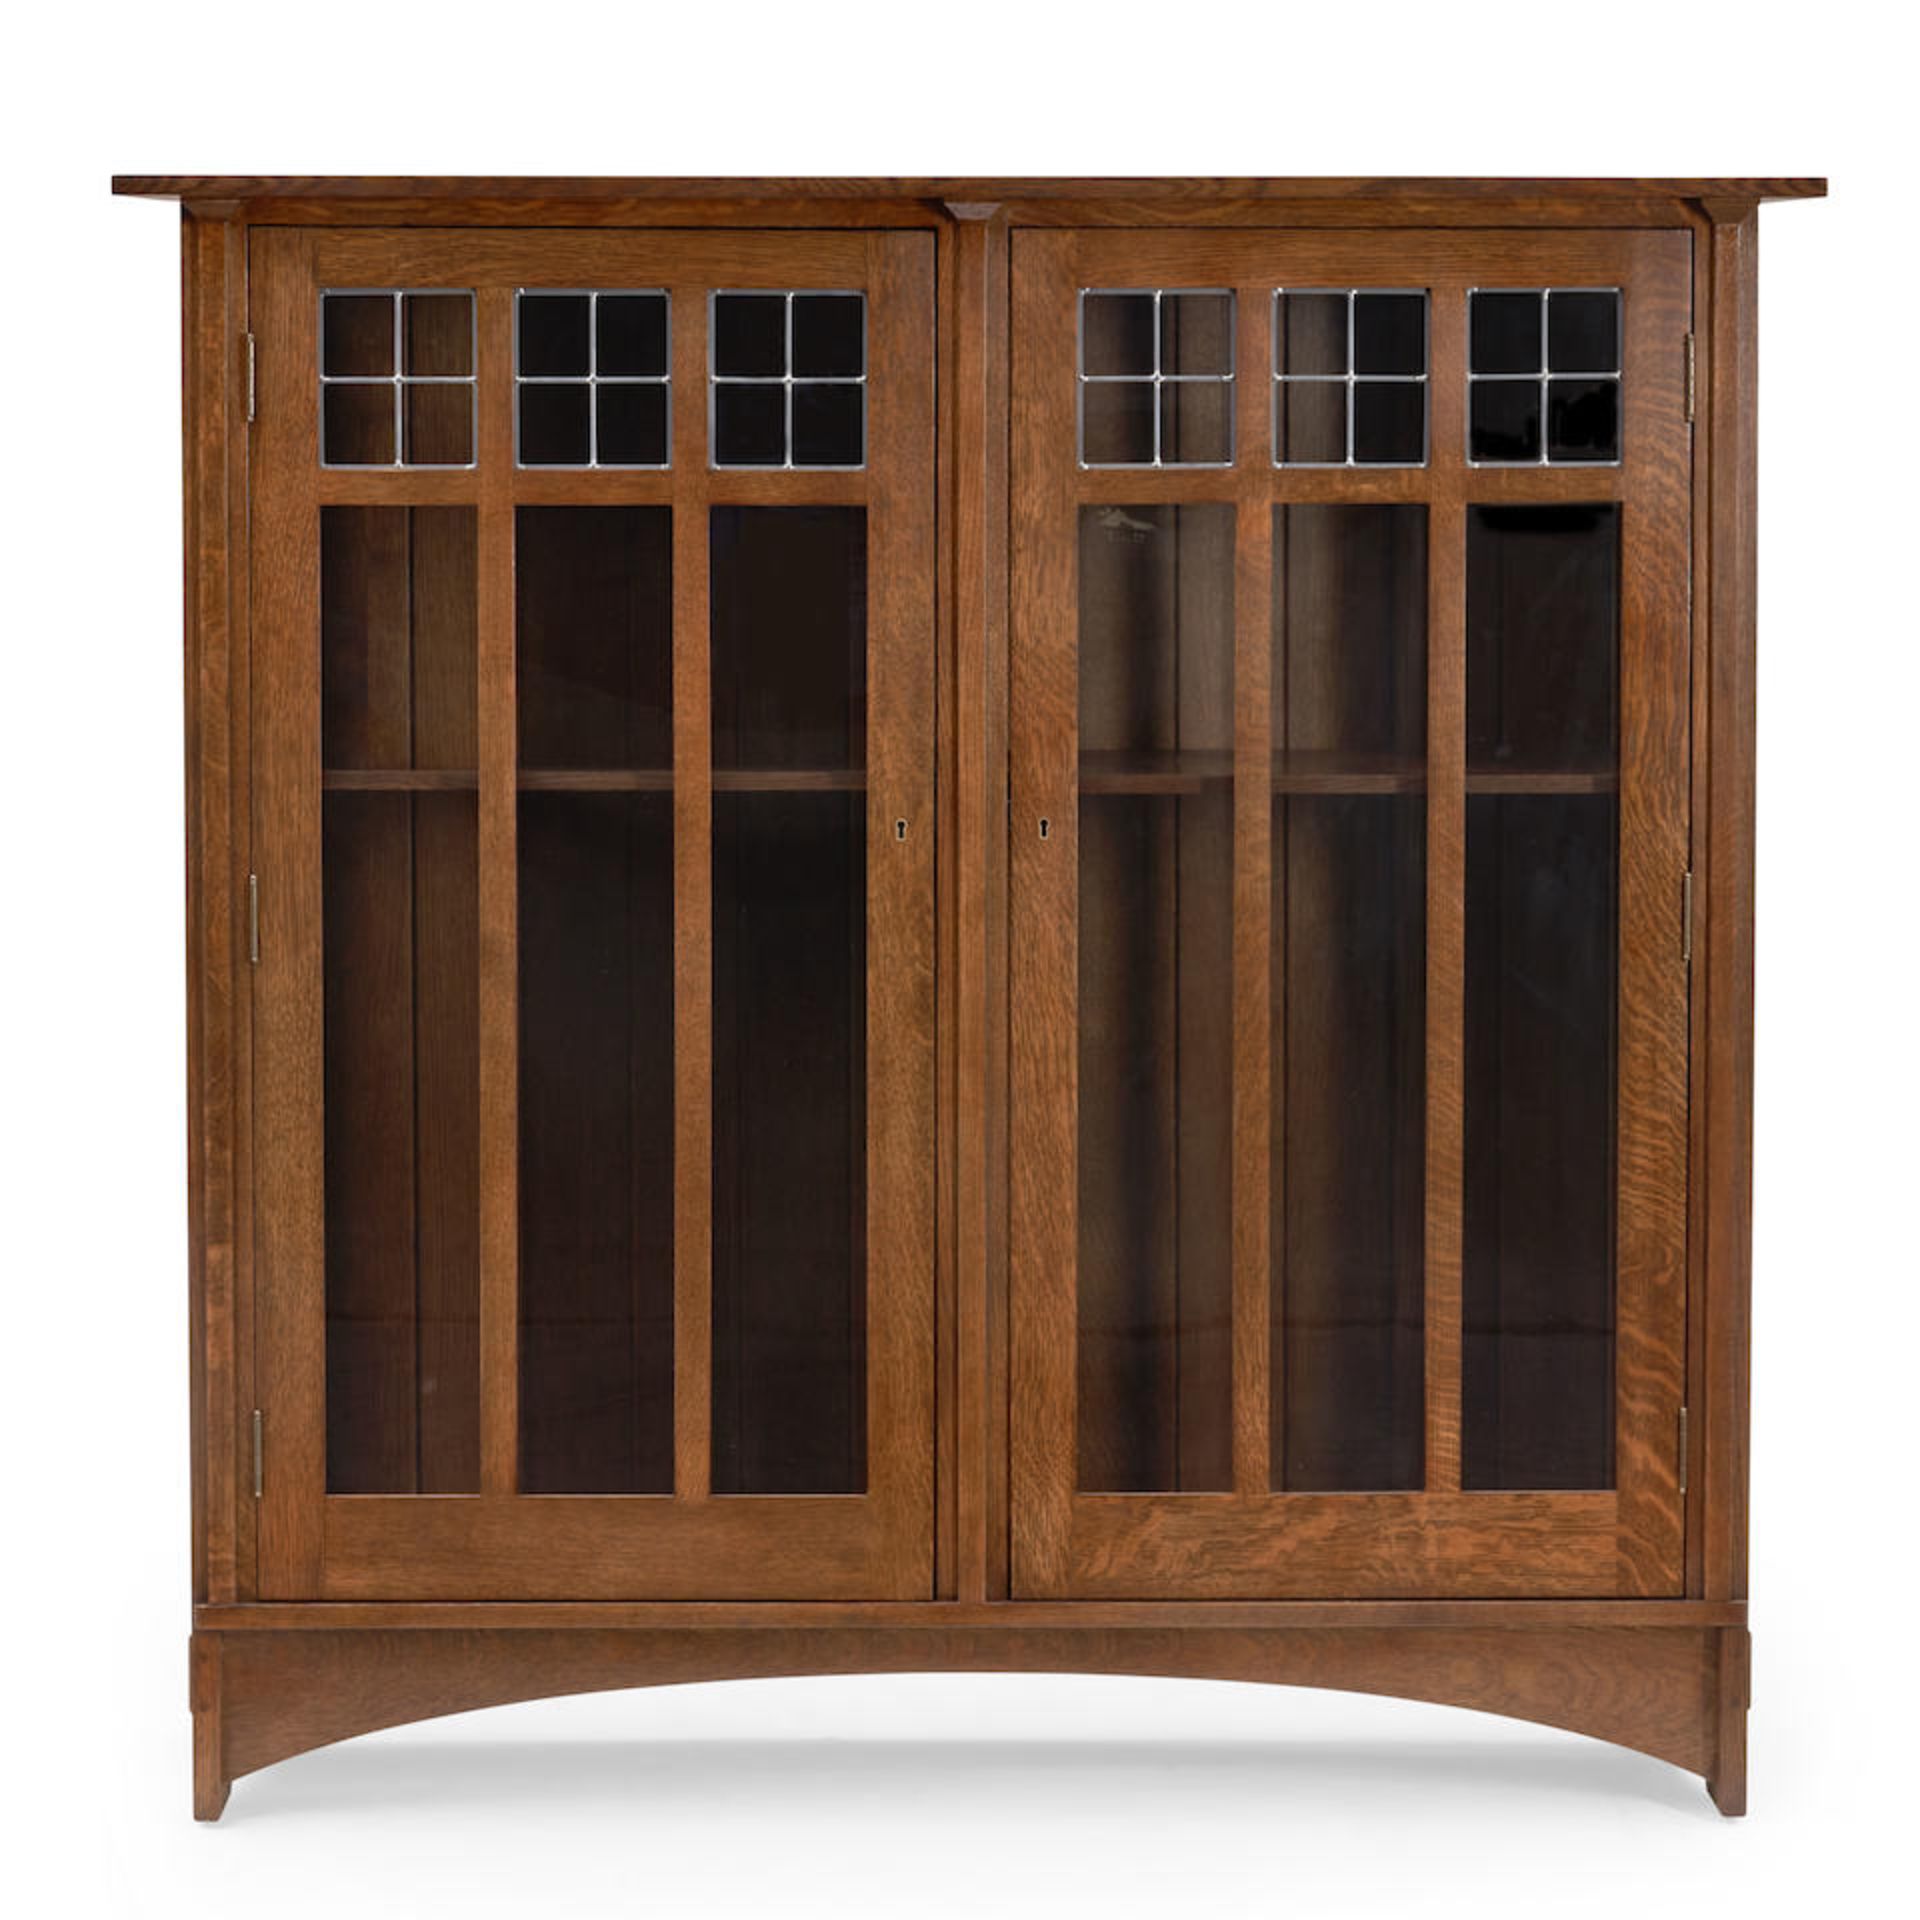 Mission-style Oak Double Bookcase with Glazed Doors, Stickley, Manlius, New York, 2015.